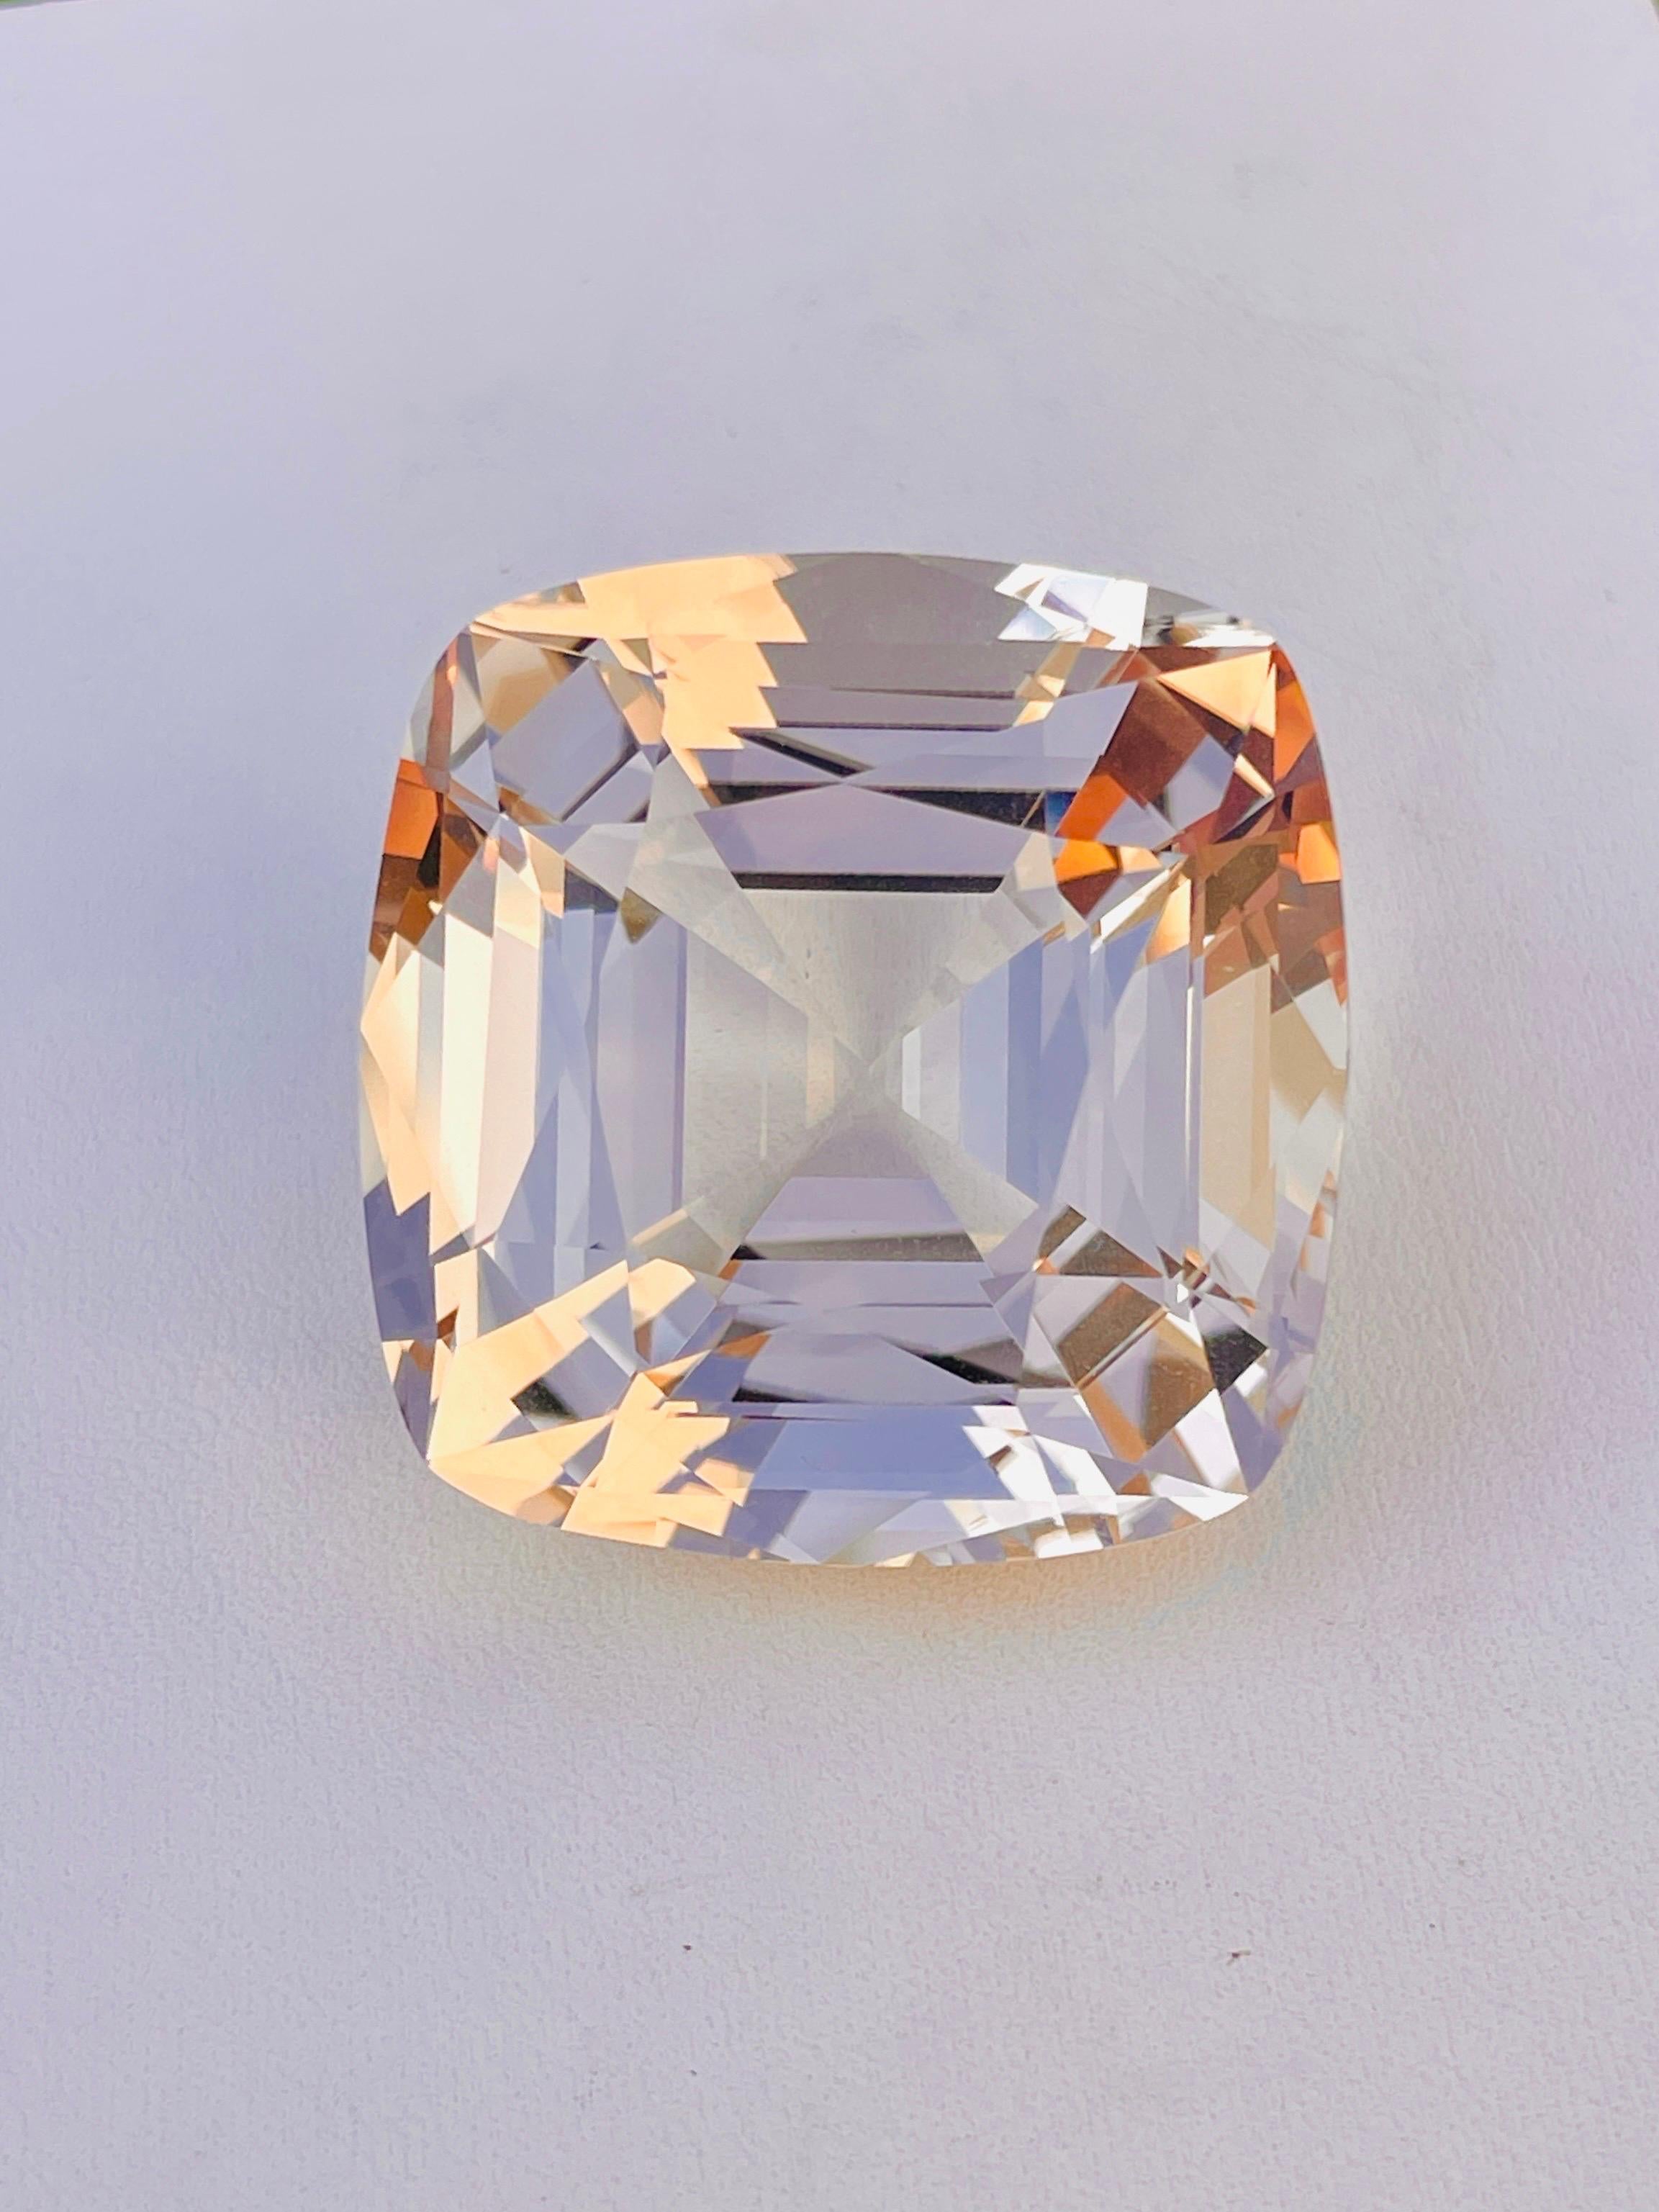 Git Certified 221.4ct natural topaz no treatment Brazil collection size WB cut For Sale 1